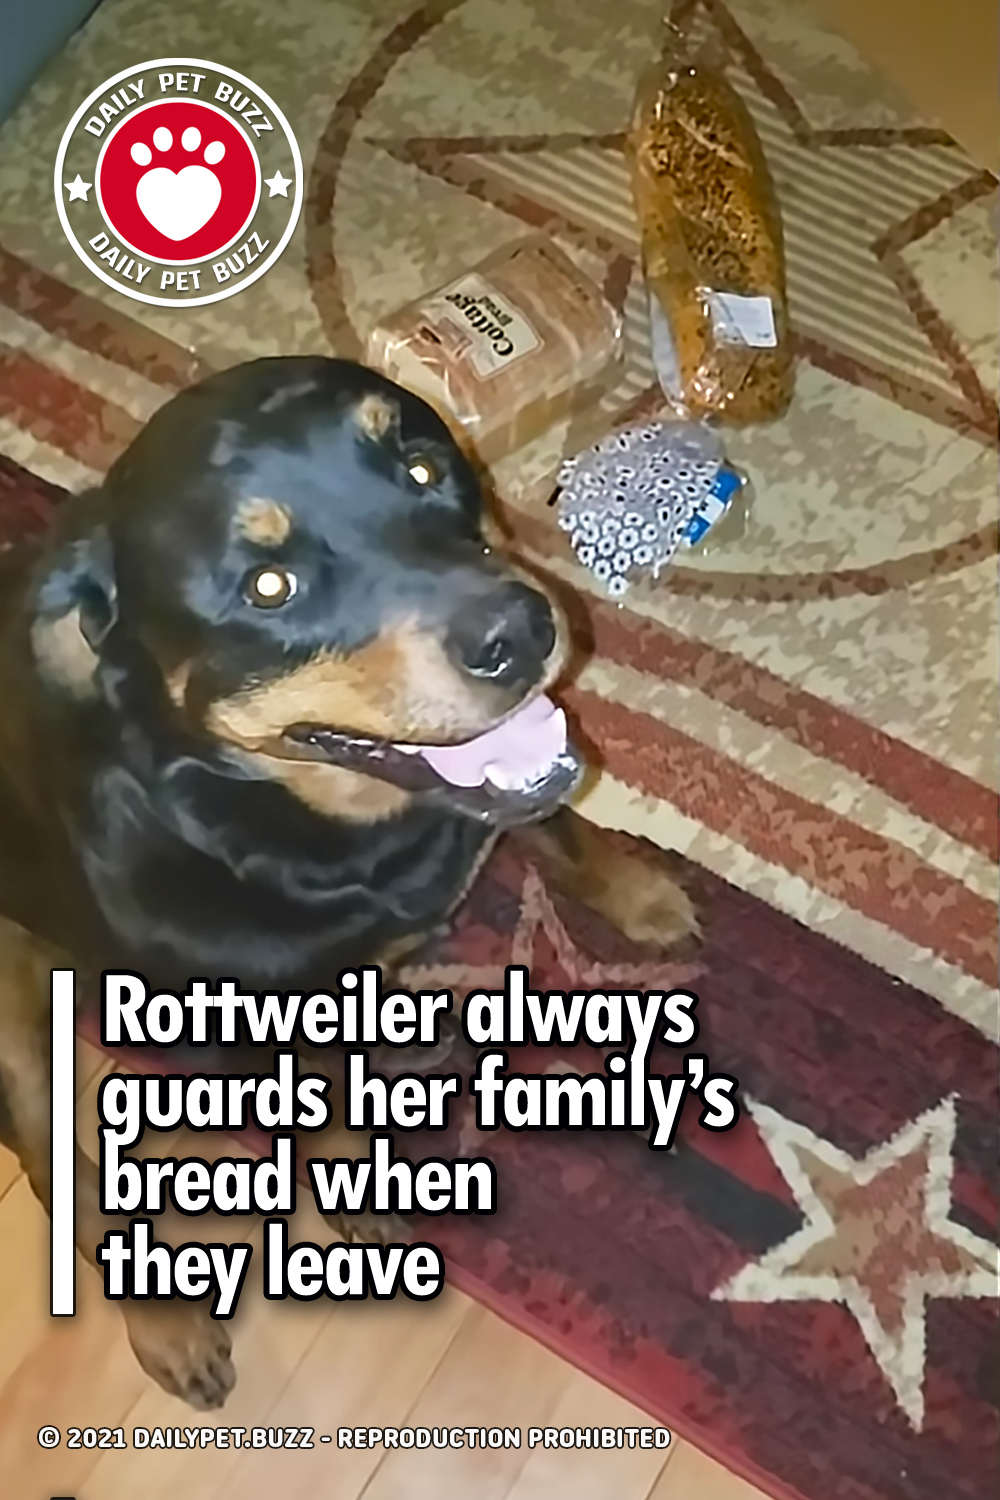 Rottweiler always guards her family’s bread when they leave